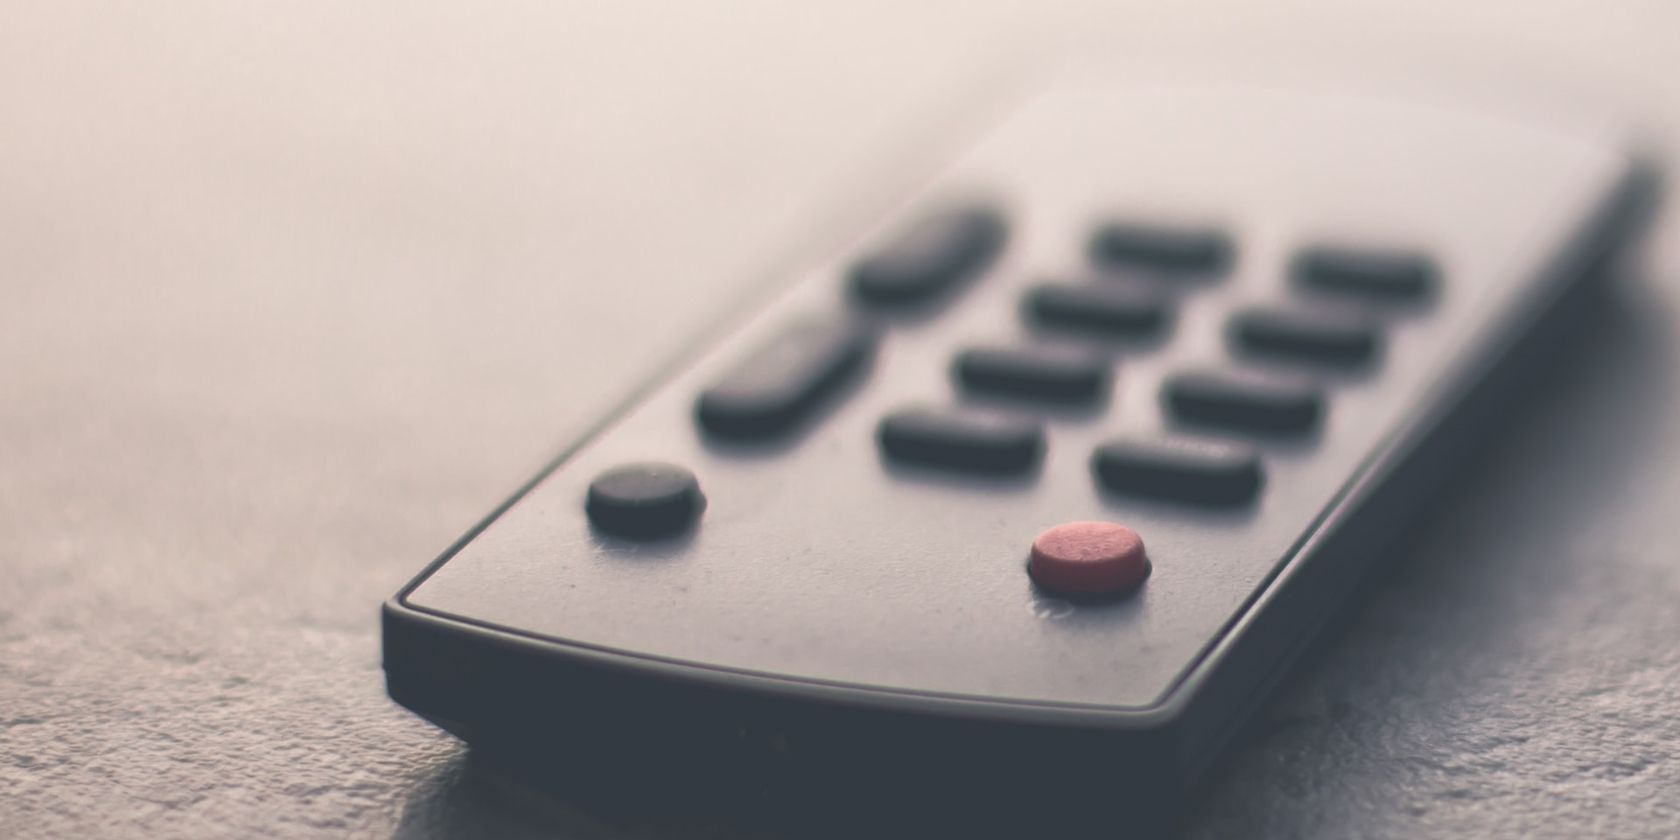 Infrared vs. Radio Frequency: How Does a Remote Control Work?